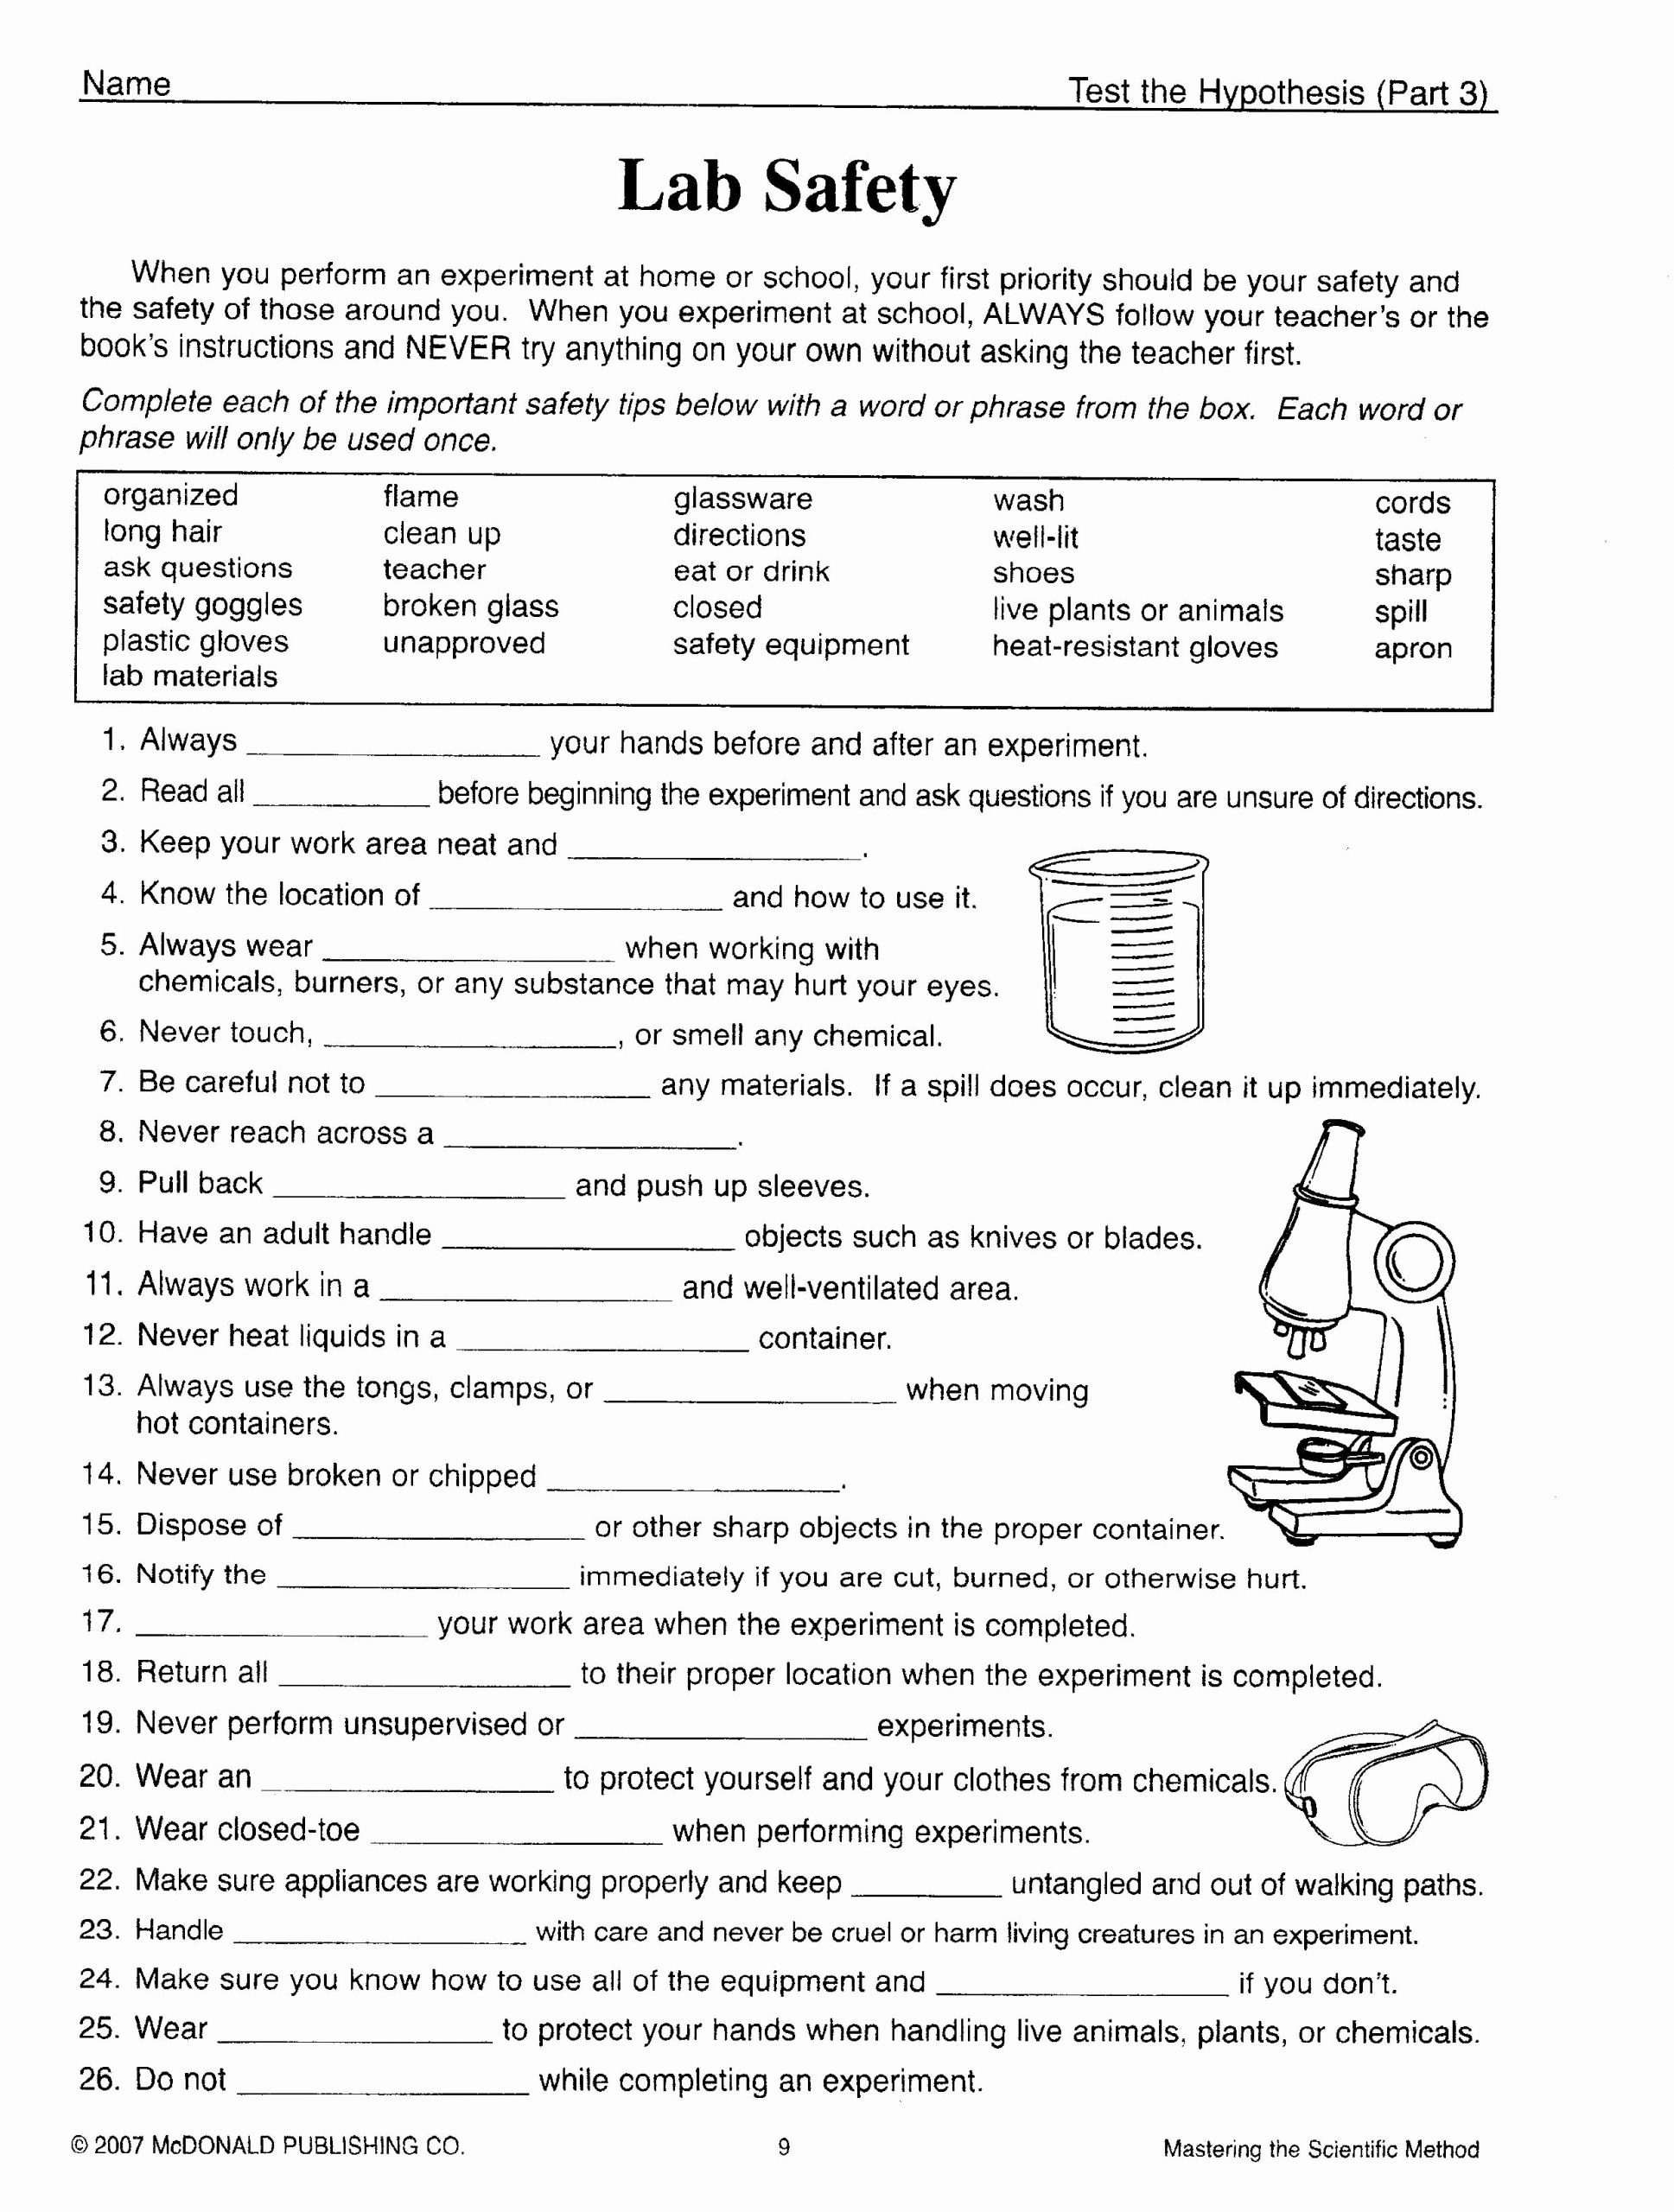 Science Worksheets for 7th Grade Luxury 7th Grade Science Worksheets Lab Safety 7th Grade